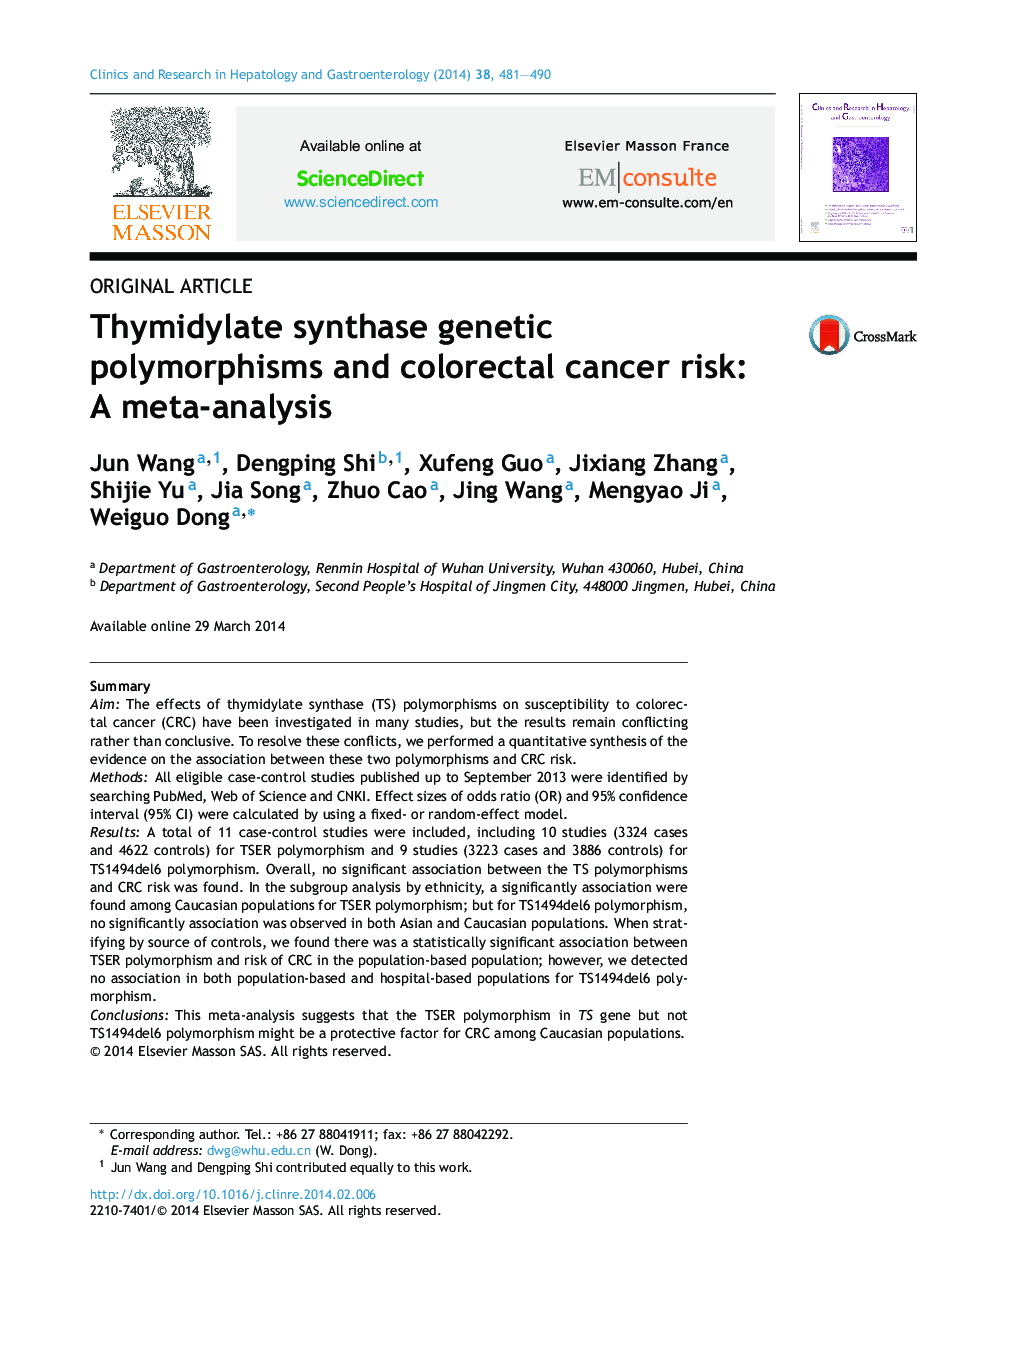 Thymidylate synthase genetic polymorphisms and colorectal cancer risk: A meta-analysis